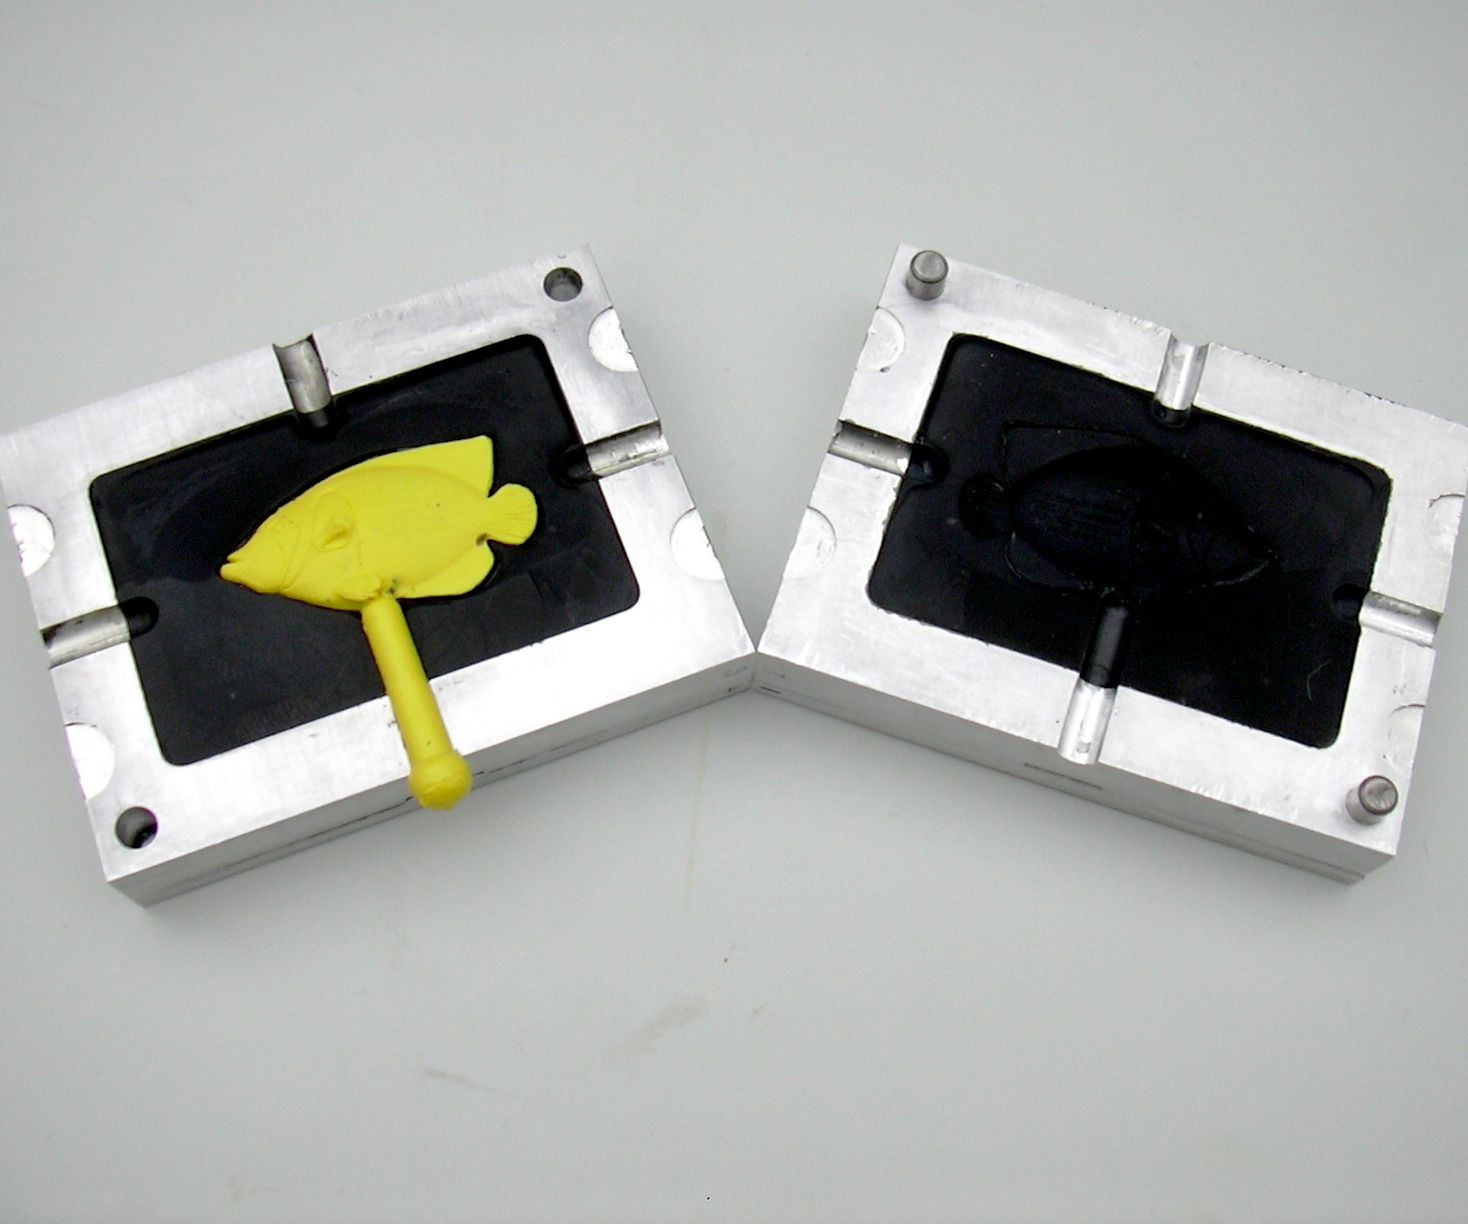 Home Plastic Injection Molding With an Epoxy Mold. : 7 ...